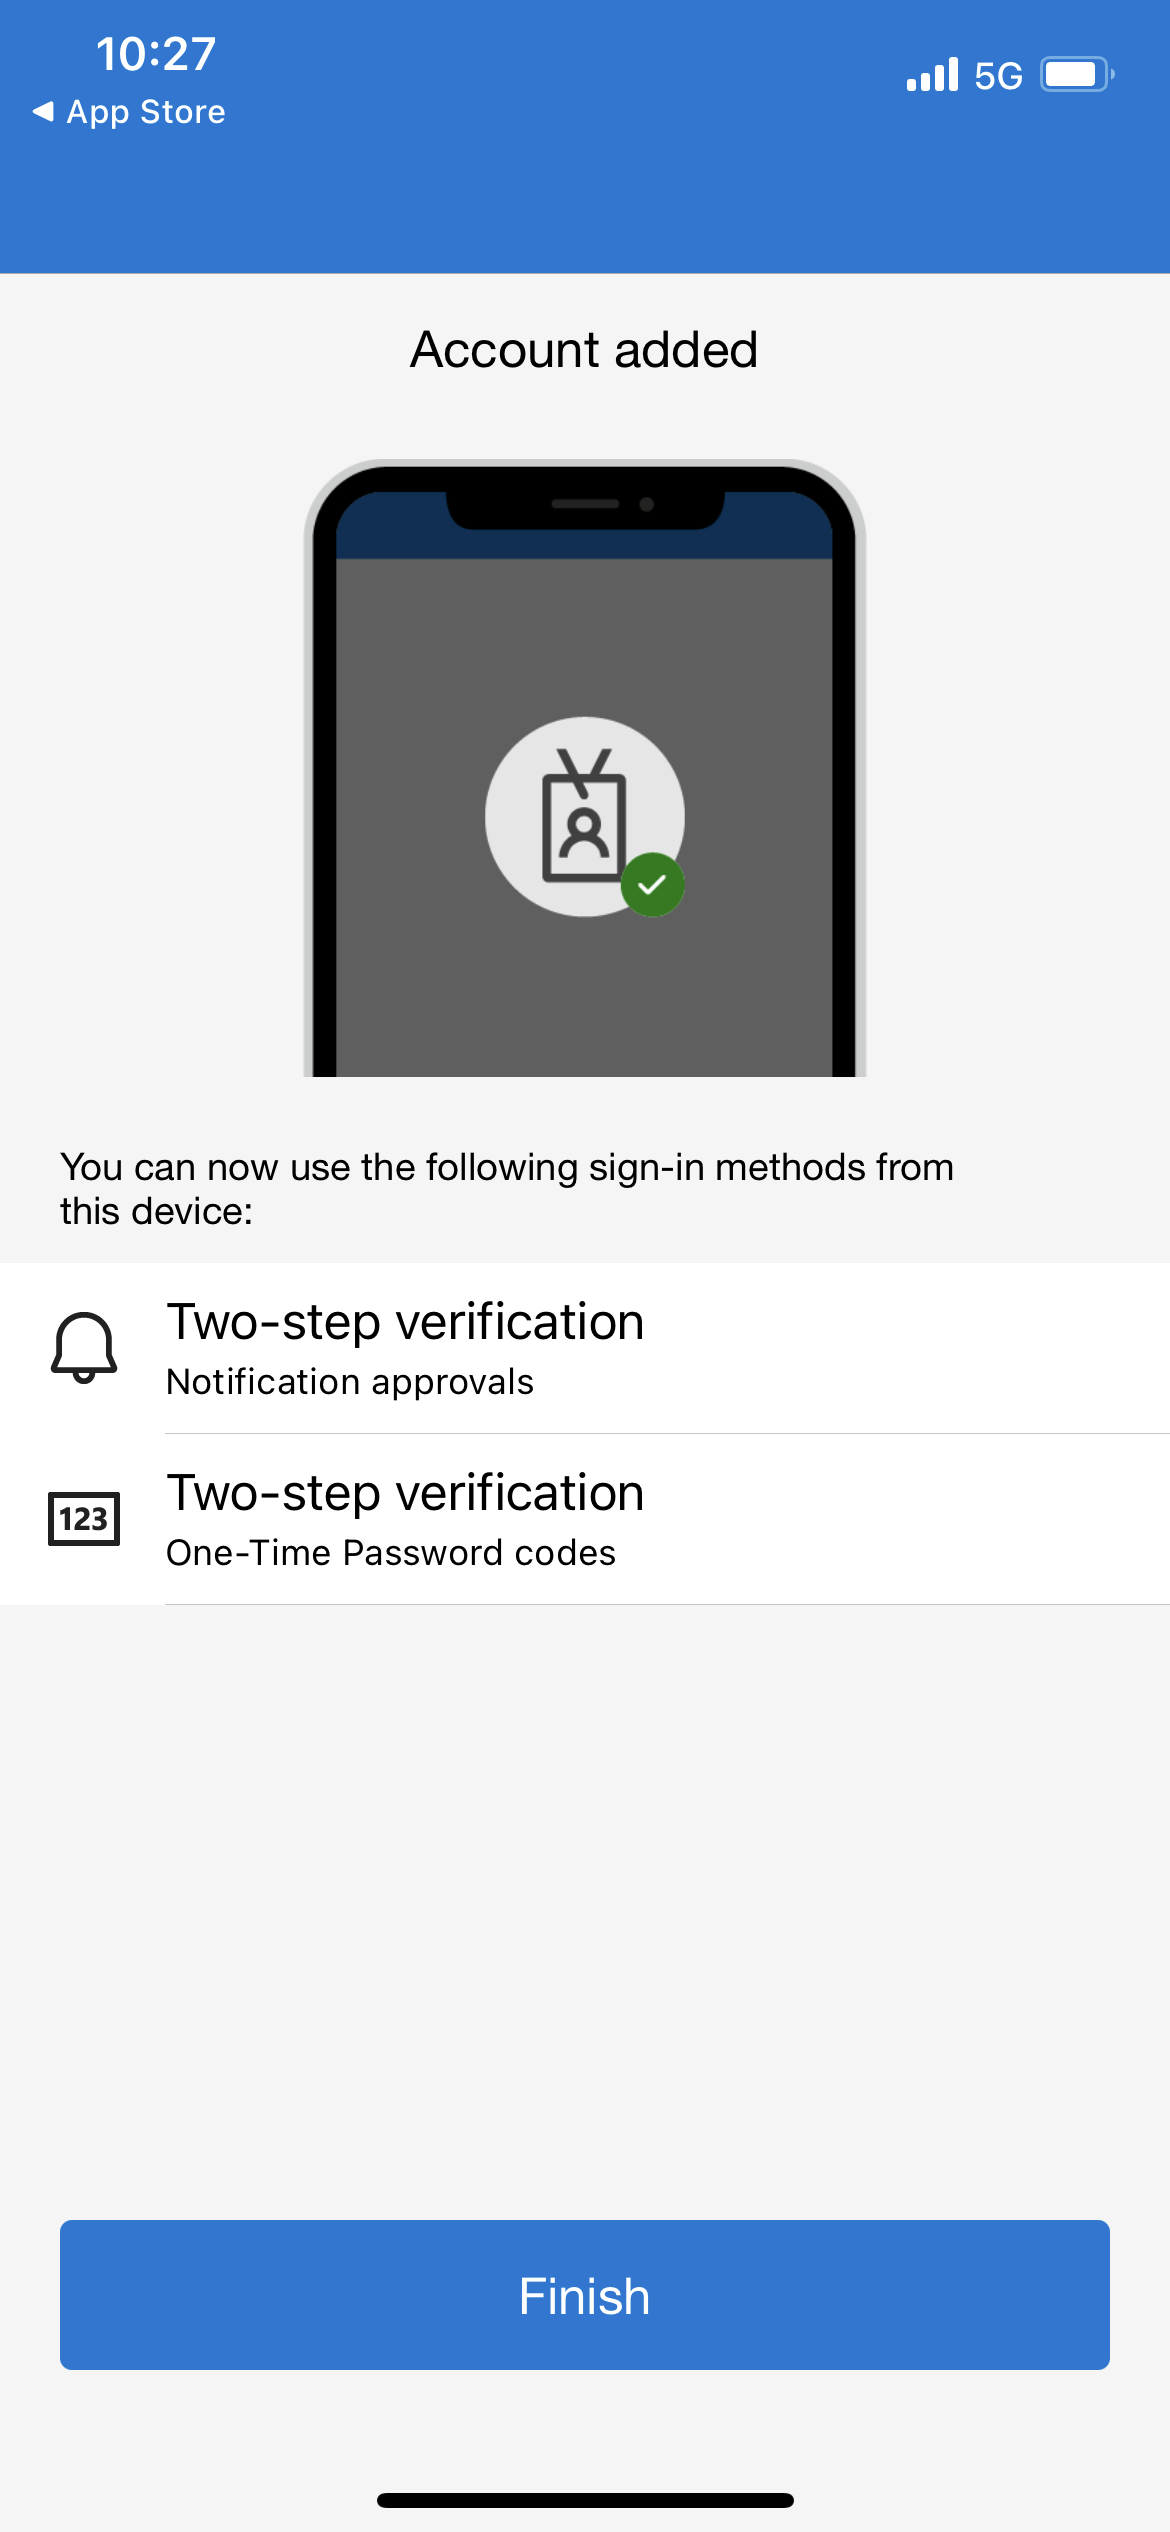 Microsoft Authenticator app set up page. If prompted allow notifications. Add an account and select work or school